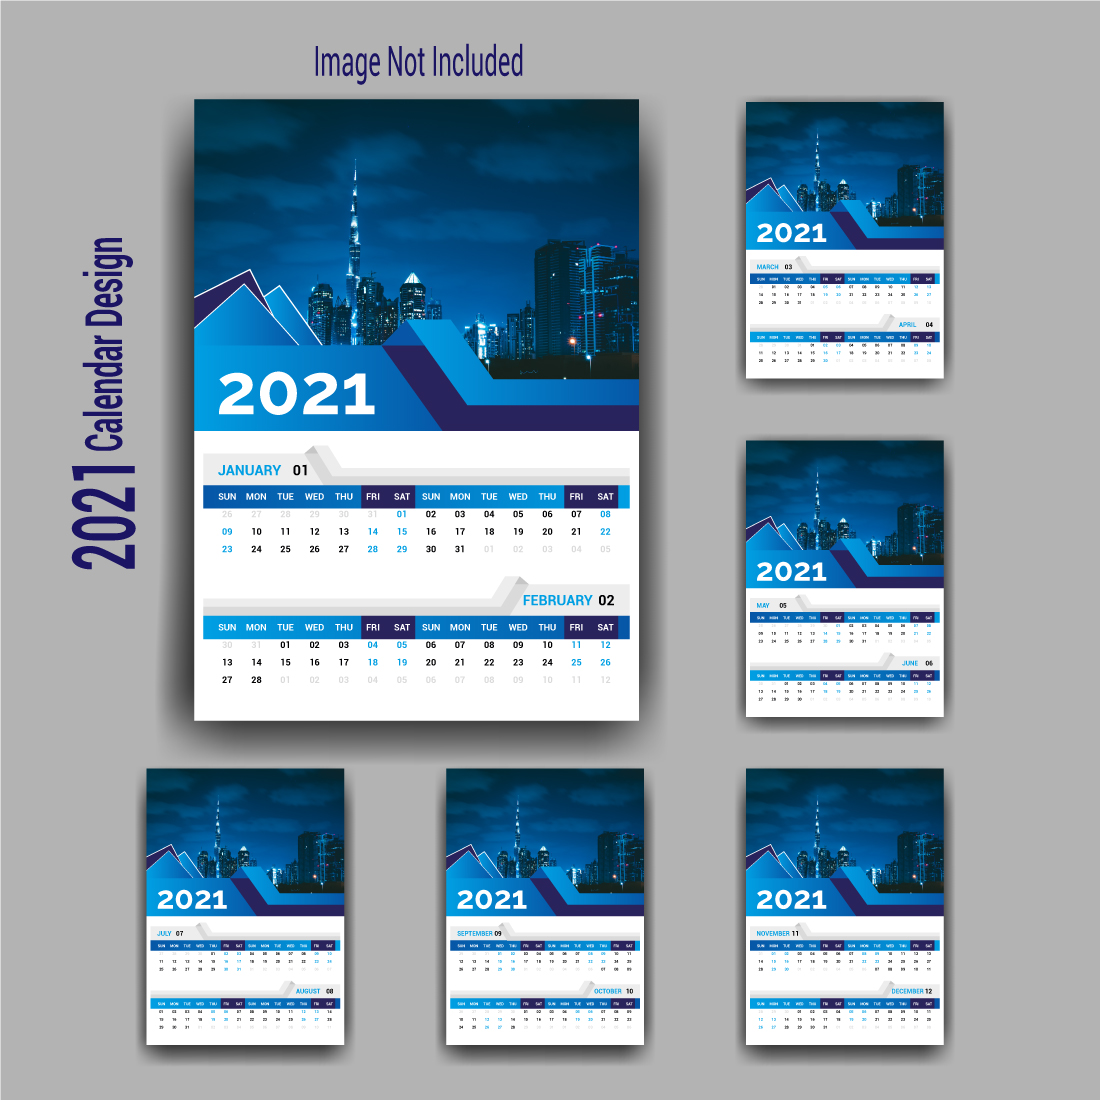 New Year Business Calendar Template Creative Design cover image.